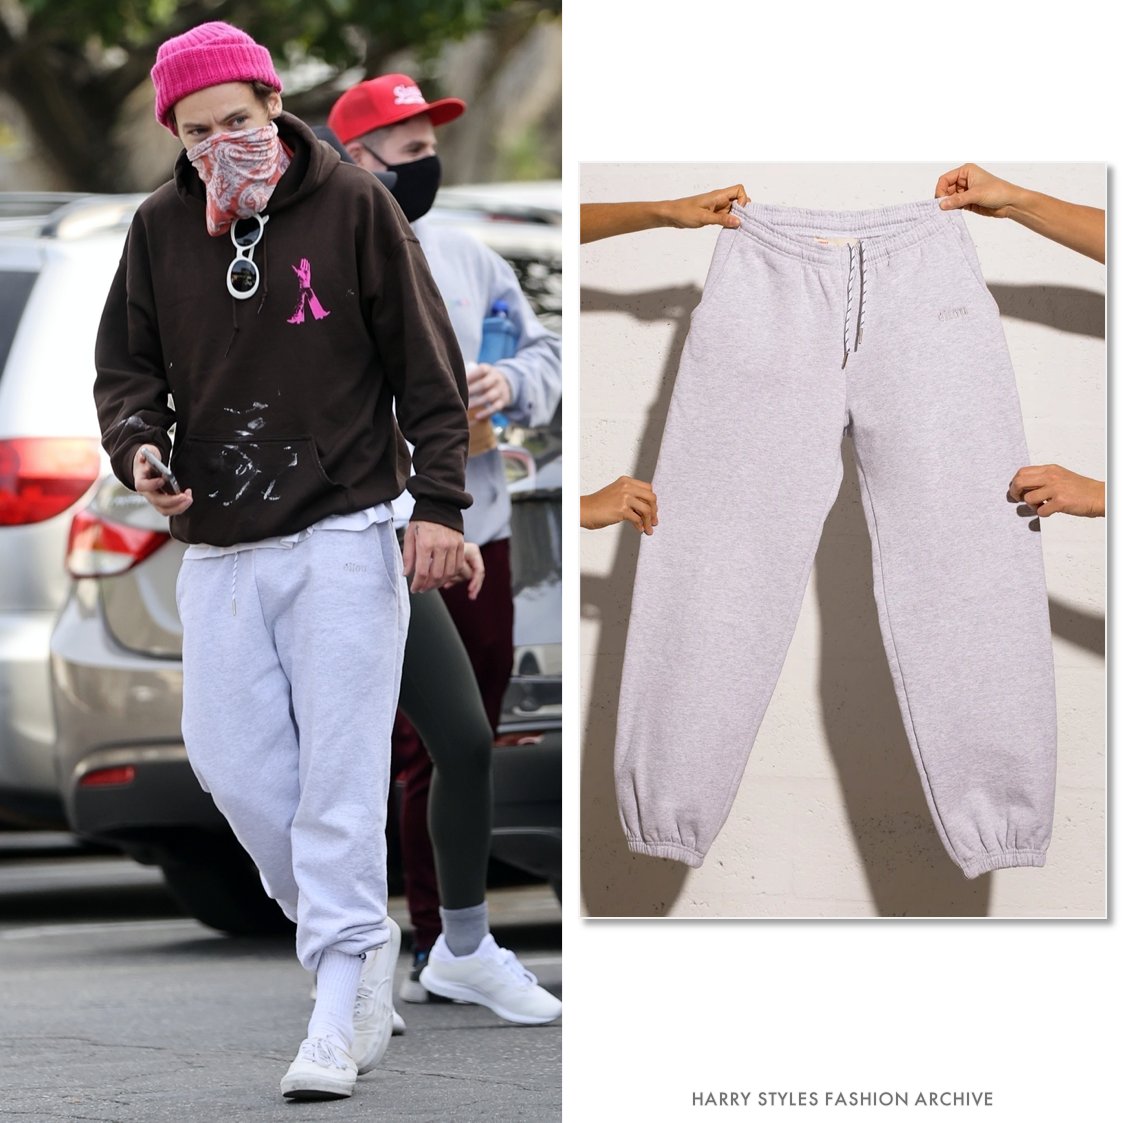 Harry Styles Fashion Archive on X: Harry wore a pair of Éliou